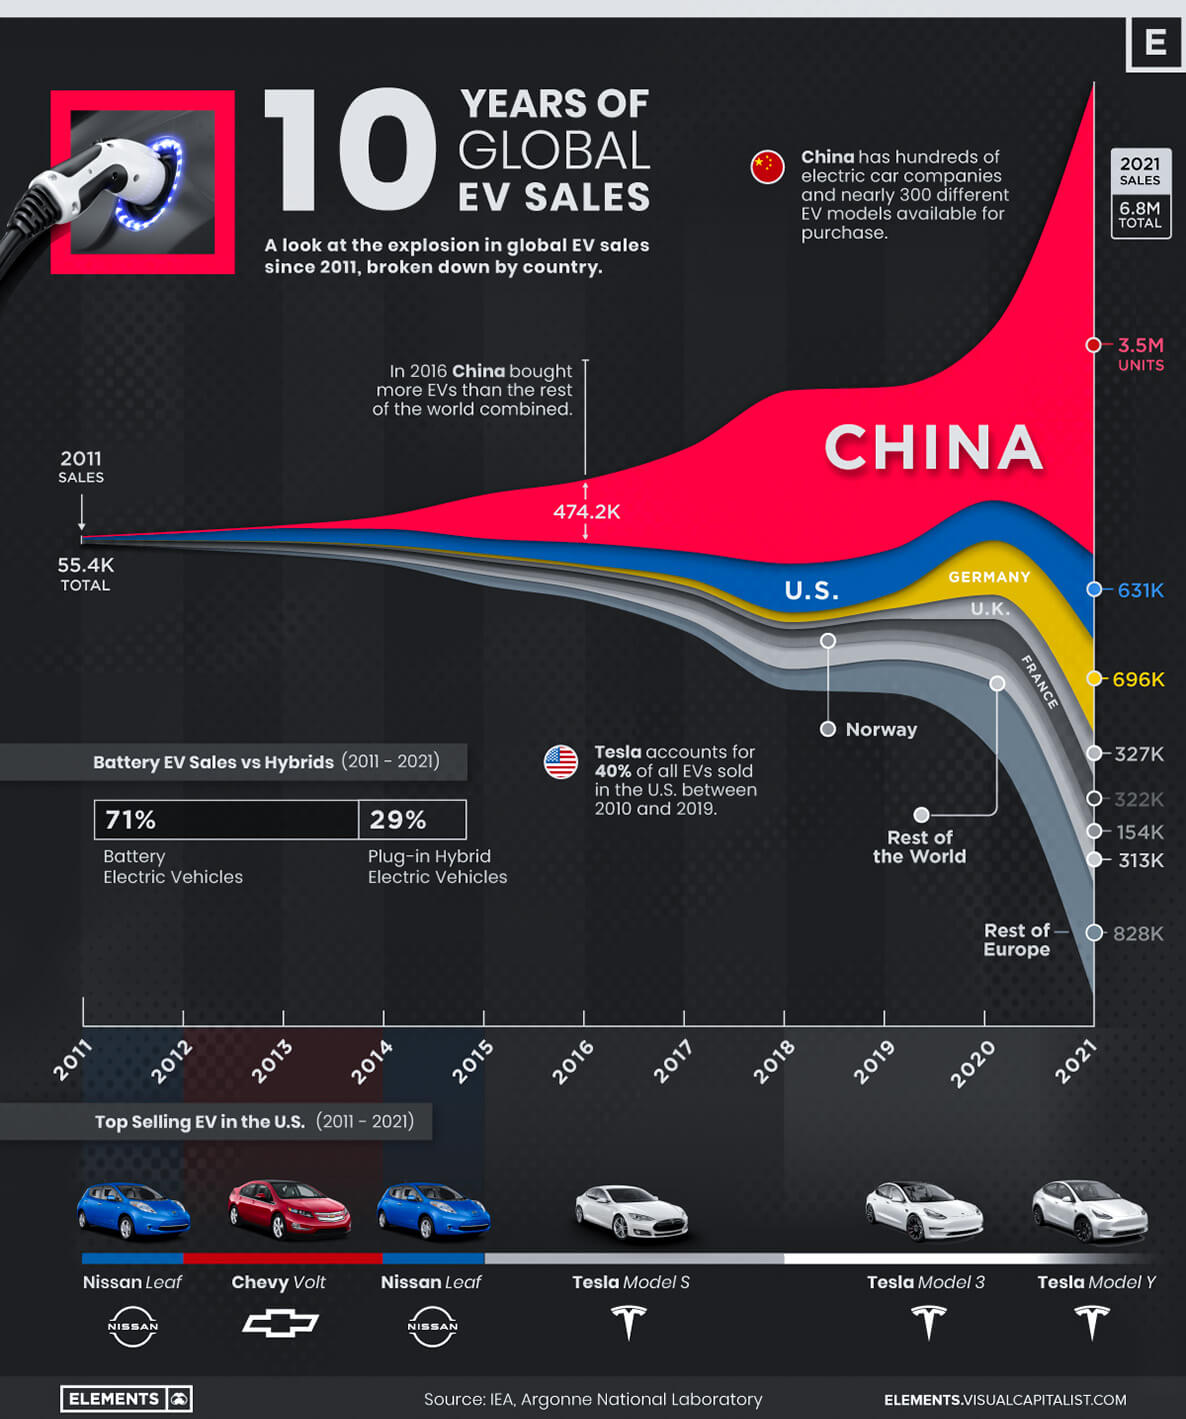 10-years-of-global-ev-sales-by-country-infographic-topforeignstocks